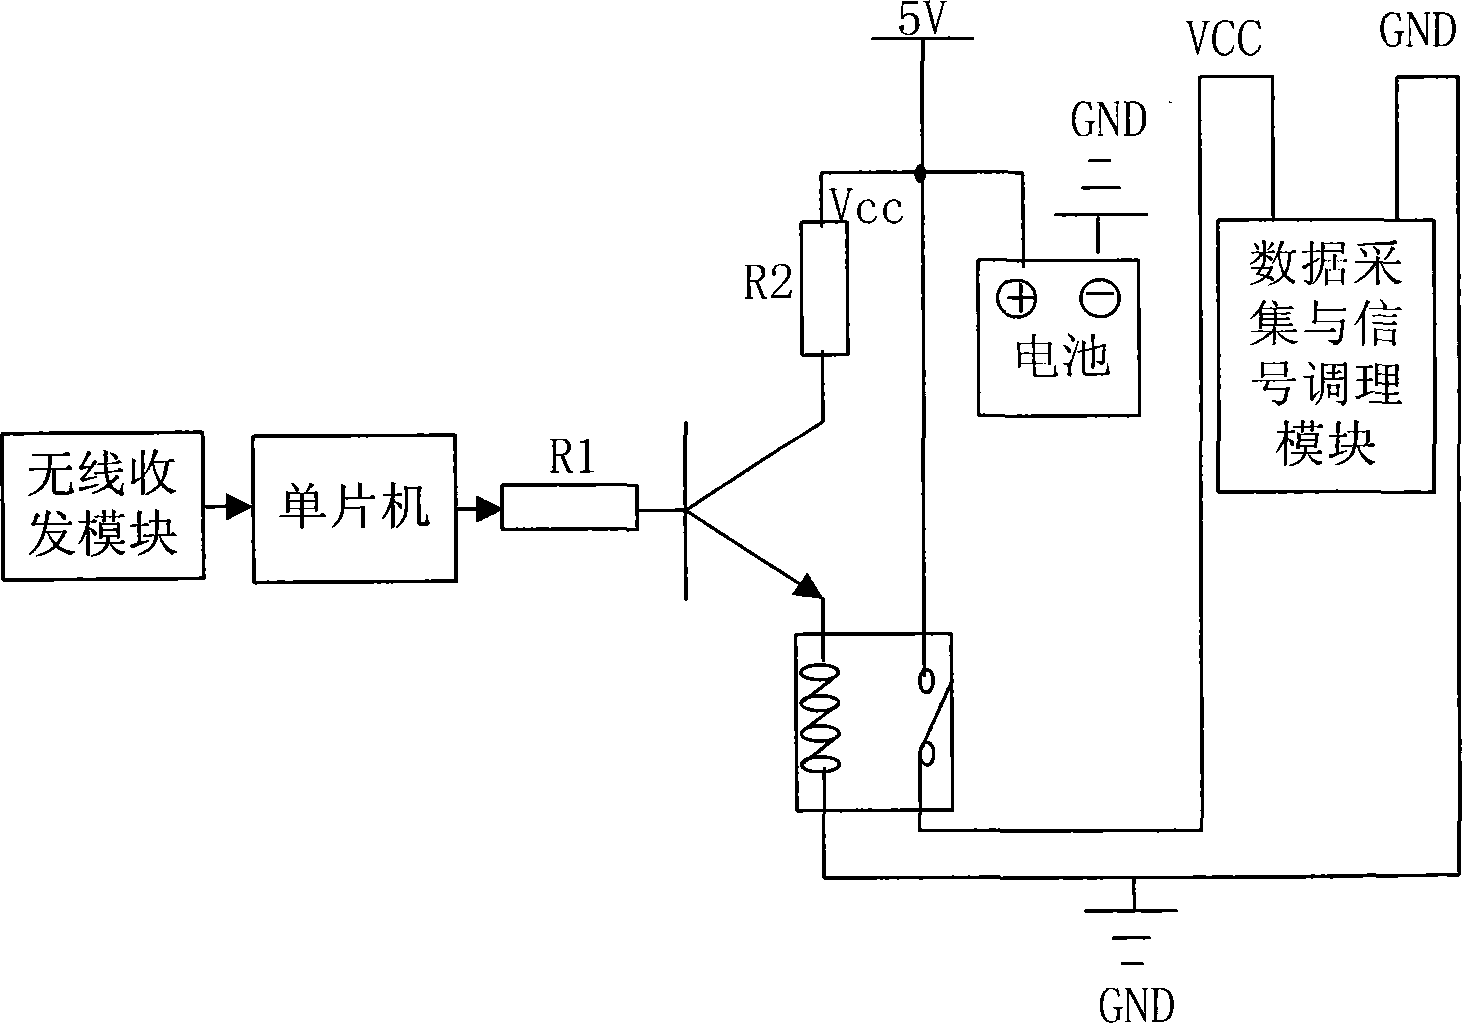 Low-power-consumption power supply system for wireless sensor network